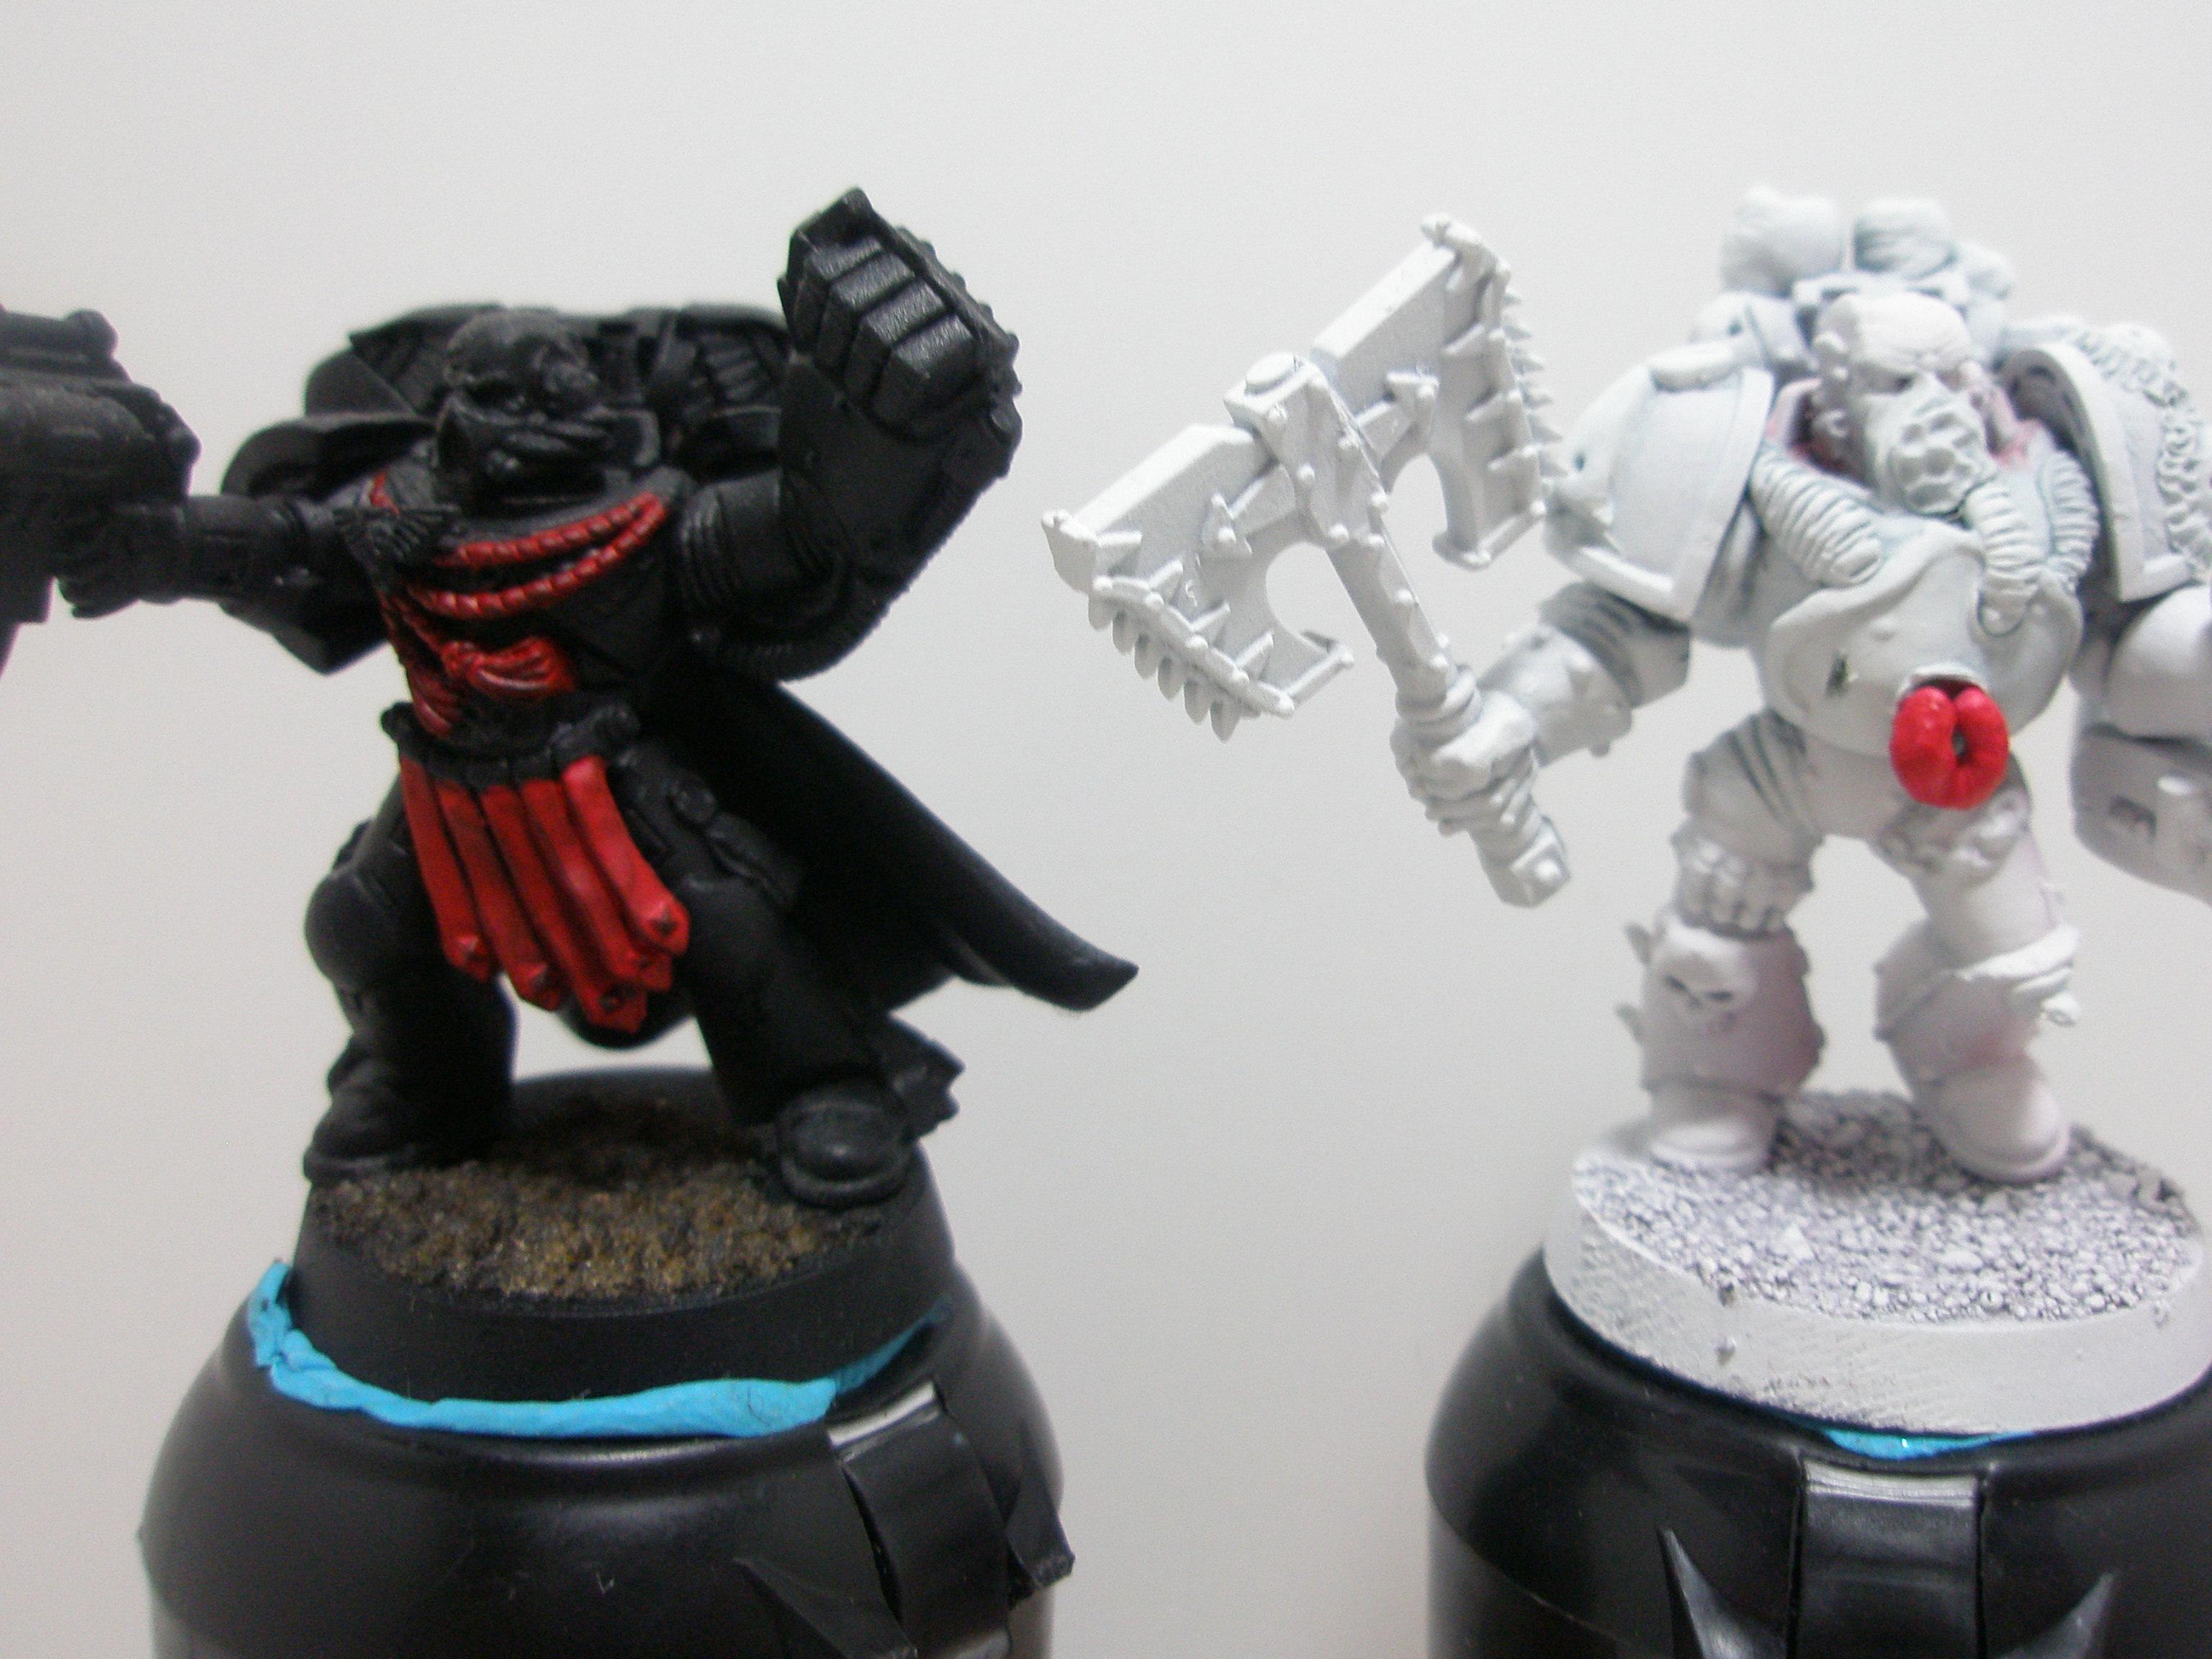 i tried it on two models, one primed white and one primed black